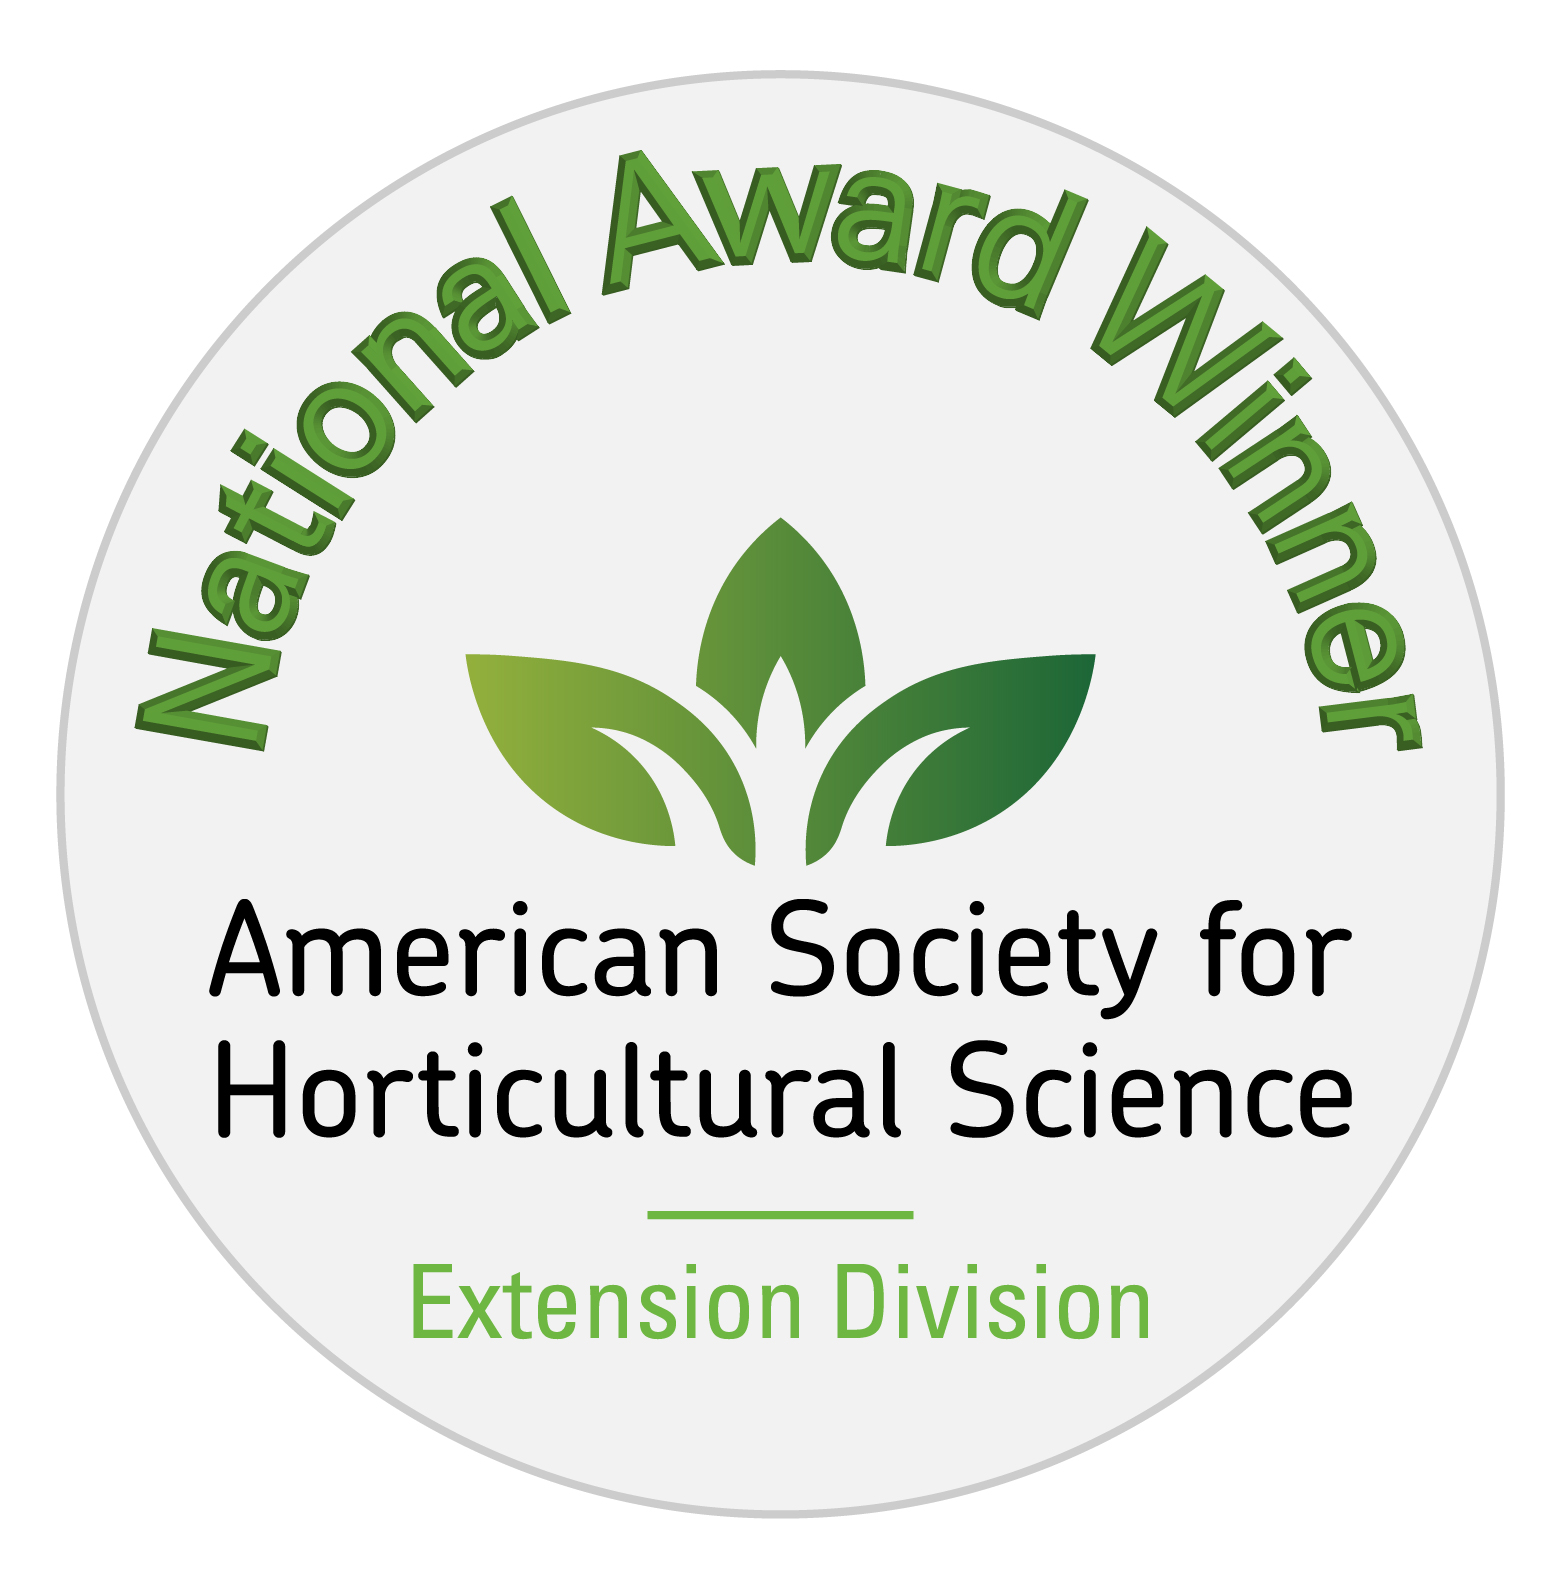 American Society for Horticultural Science award seal